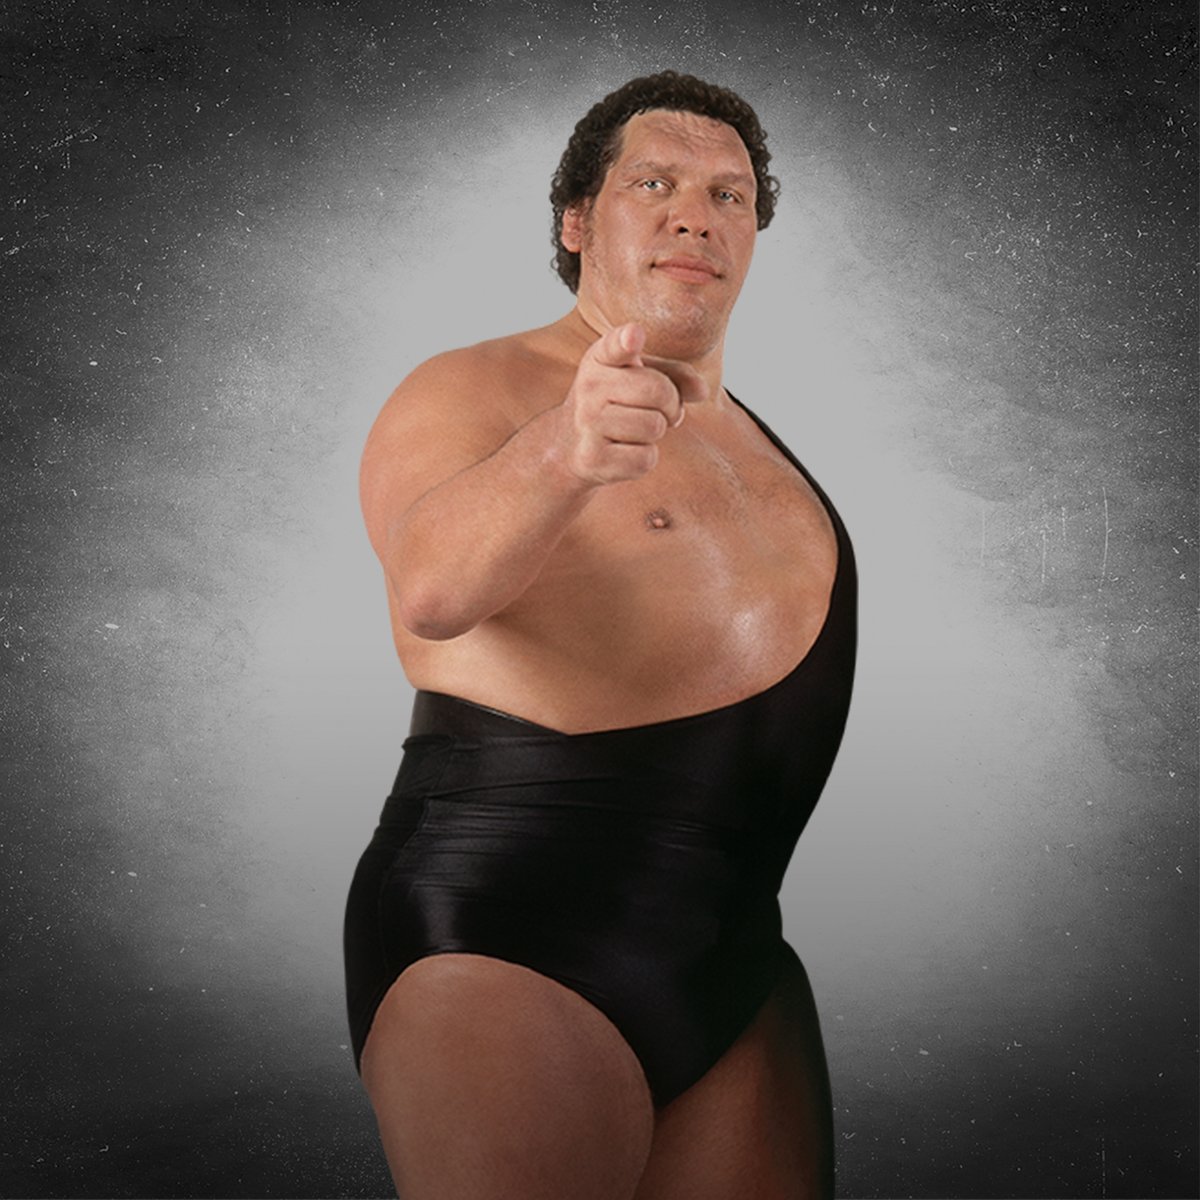 Remembering WWE Hall of Famer and cultural icon Andre the Giant on his birthday.